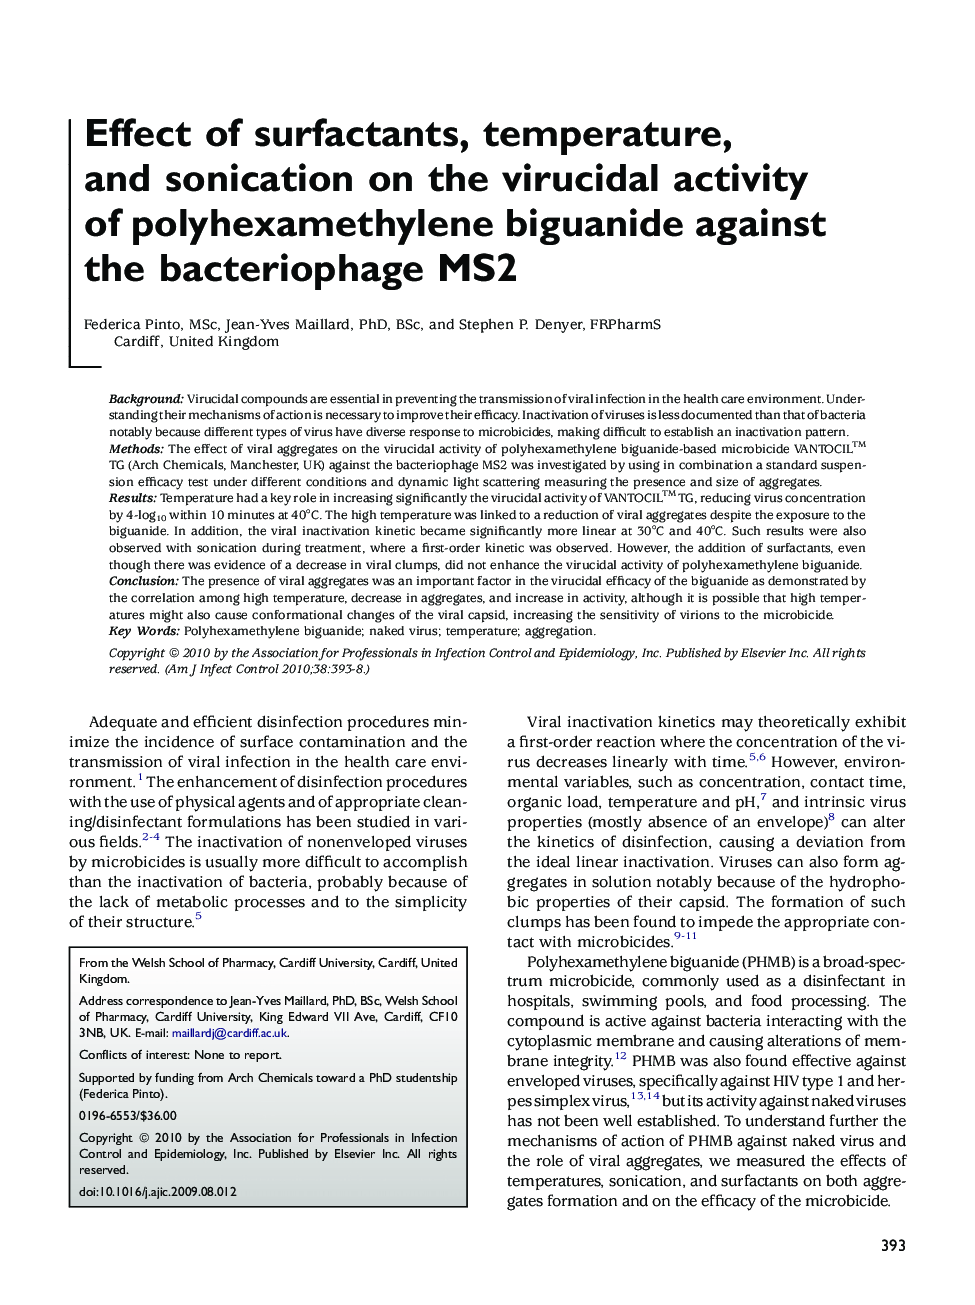 Effect of surfactants, temperature, and sonication on the virucidal activity of polyhexamethylene biguanide against the bacteriophage MS2 